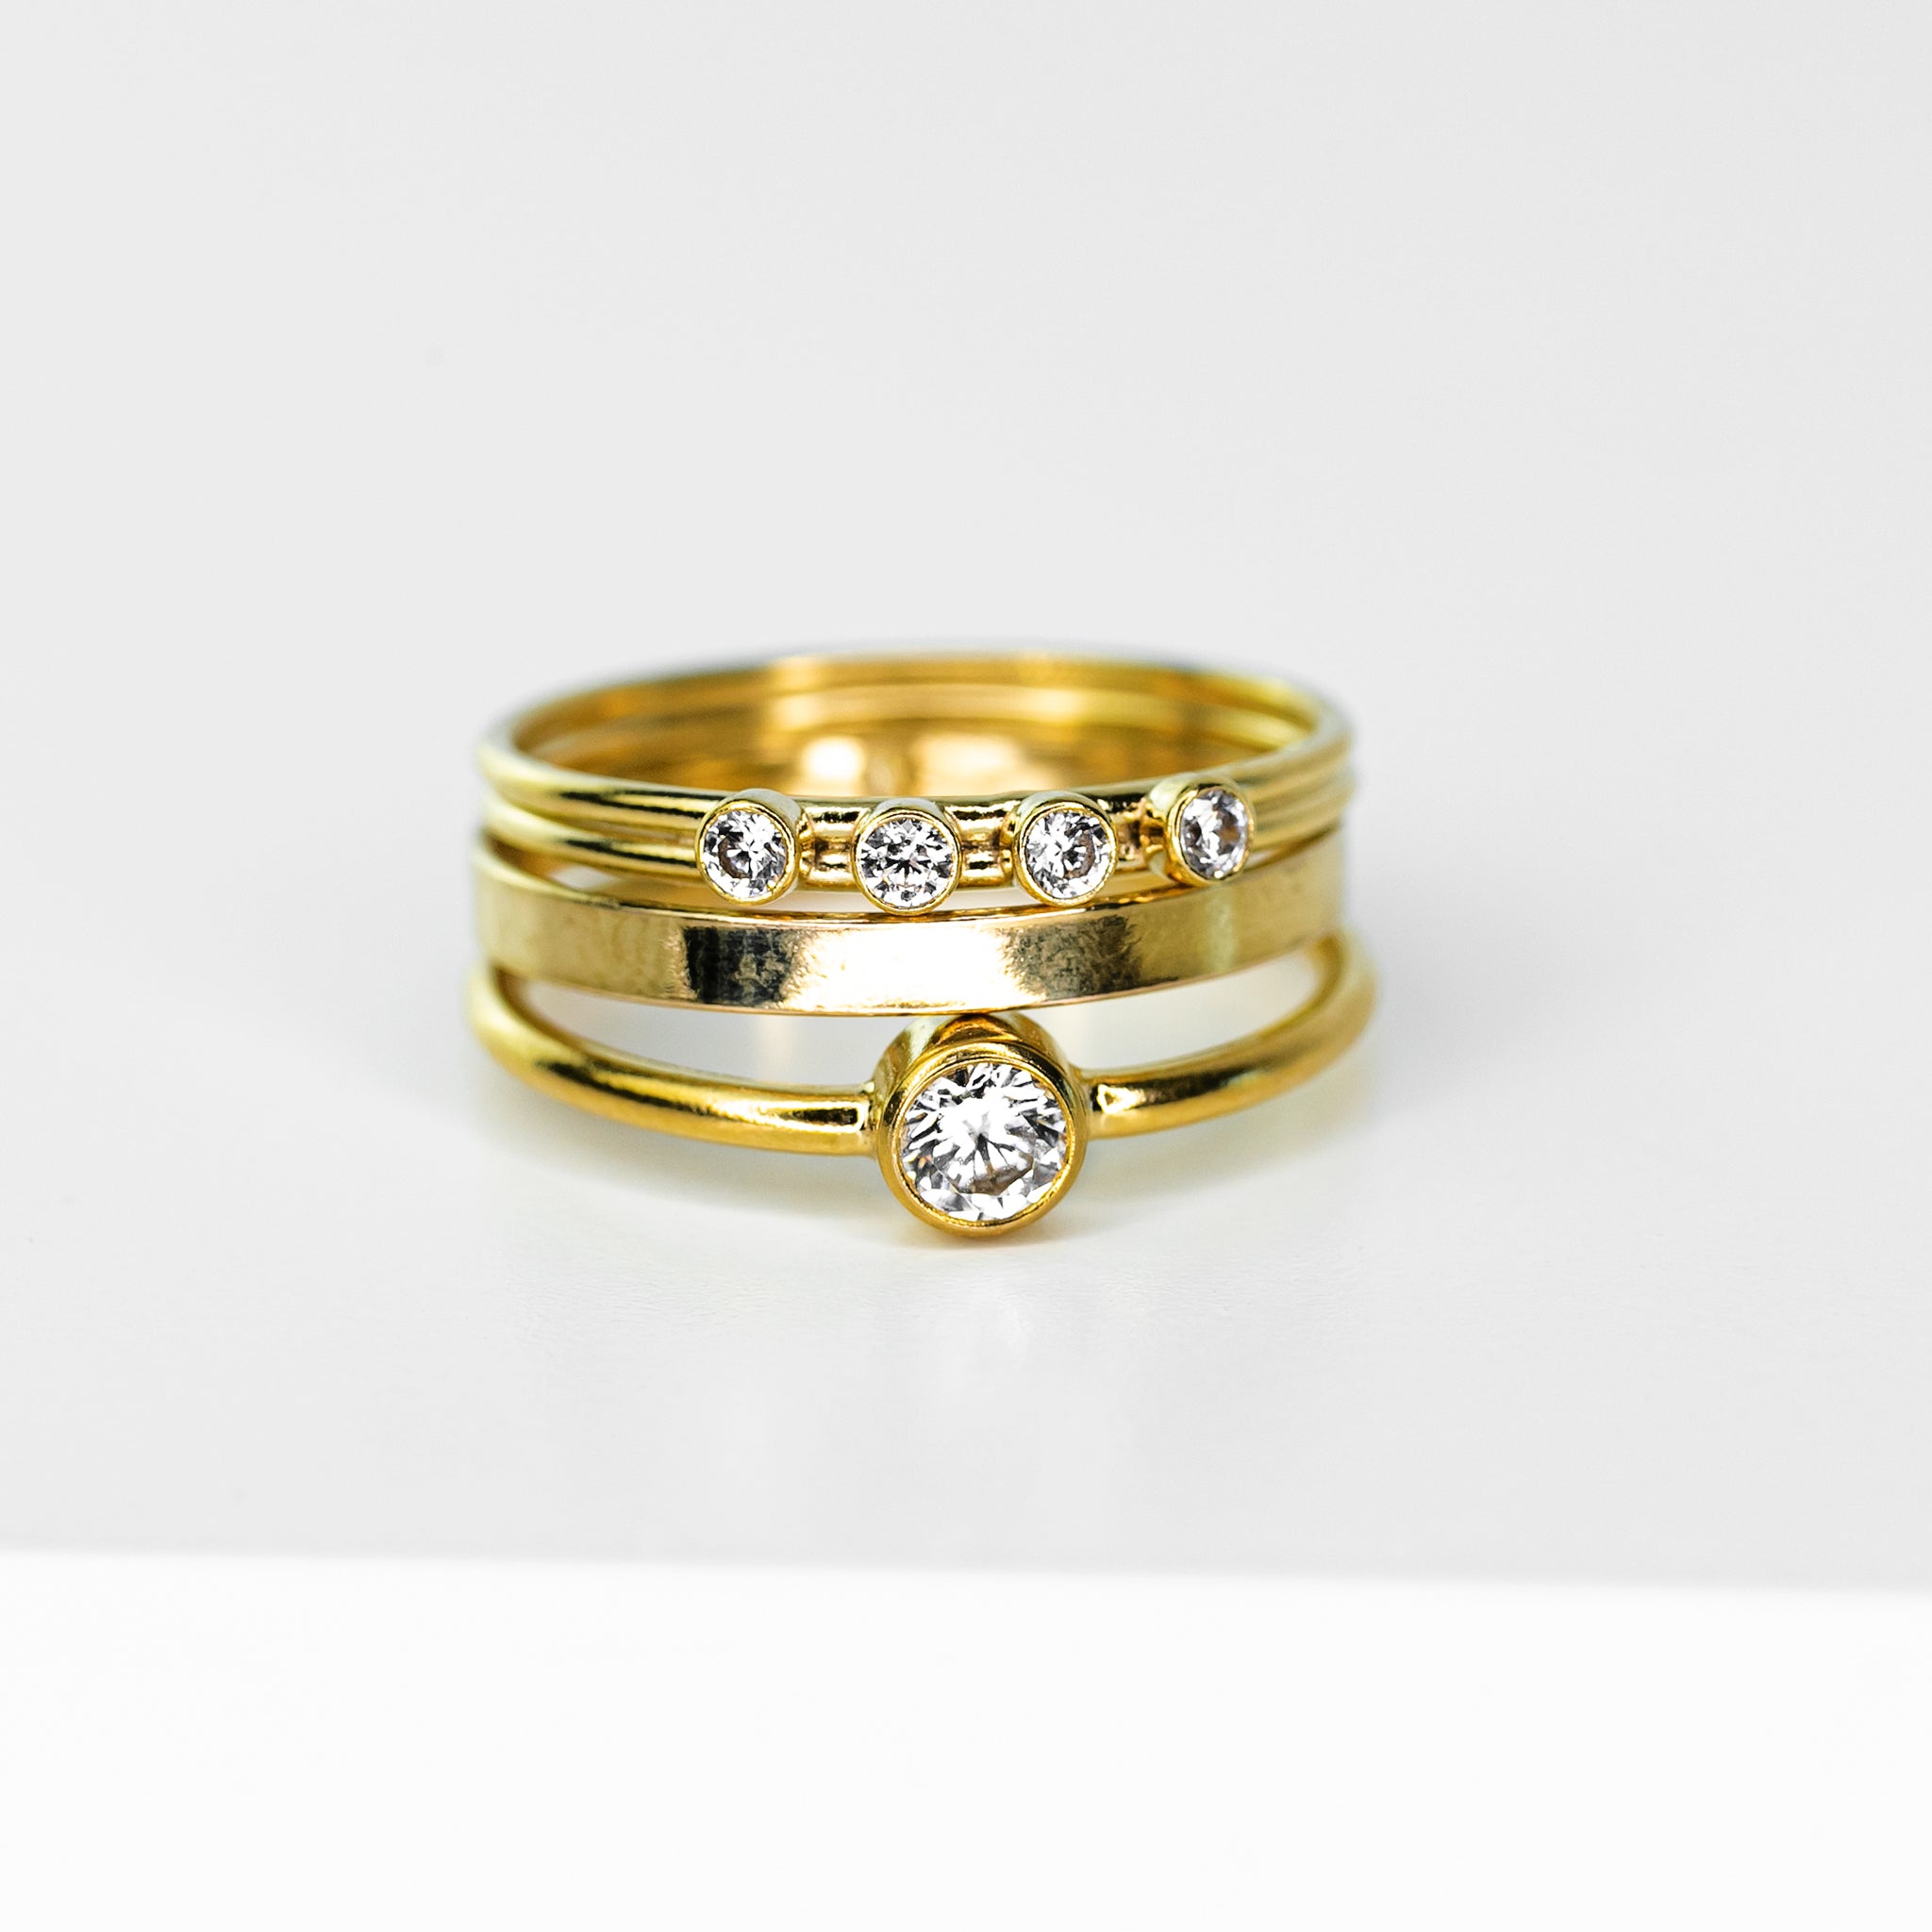 Radiant Stacking Ring Trio - Set of 3 - 14k Gold Fill